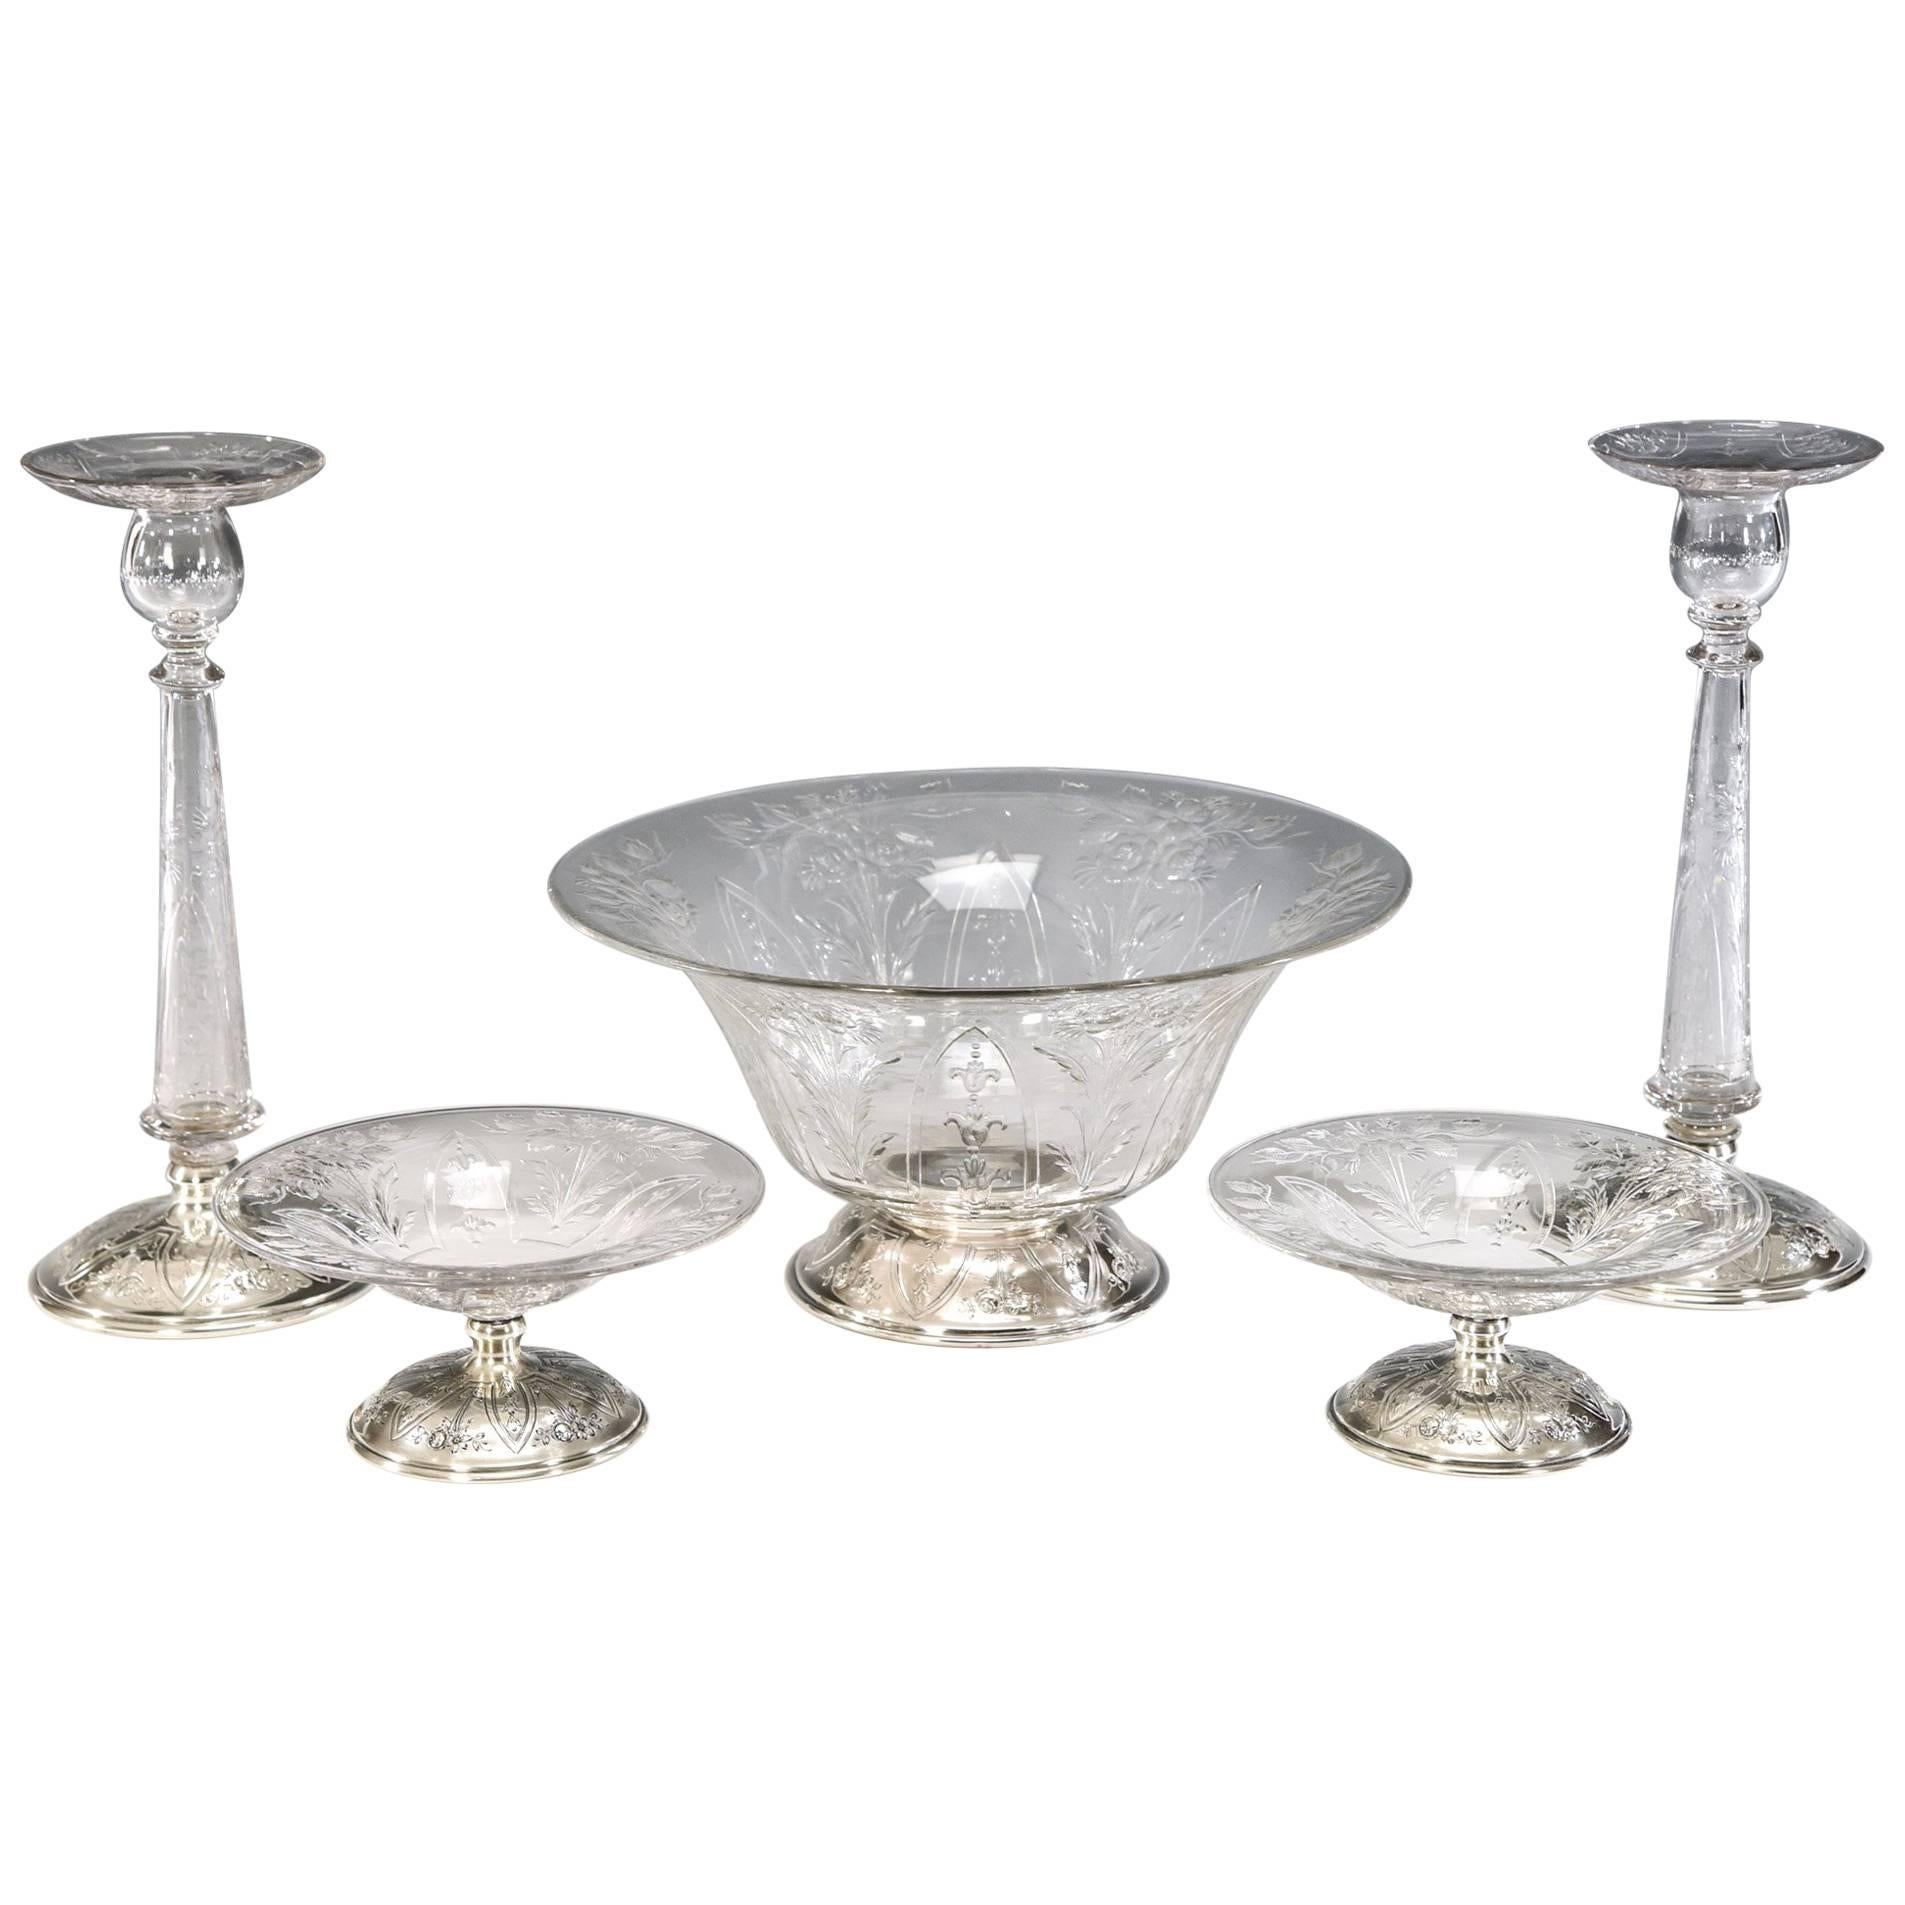 5-Piece Signed Hawkes Centerpiece Set with Copper Wheel Engraving & Silver Bases For Sale